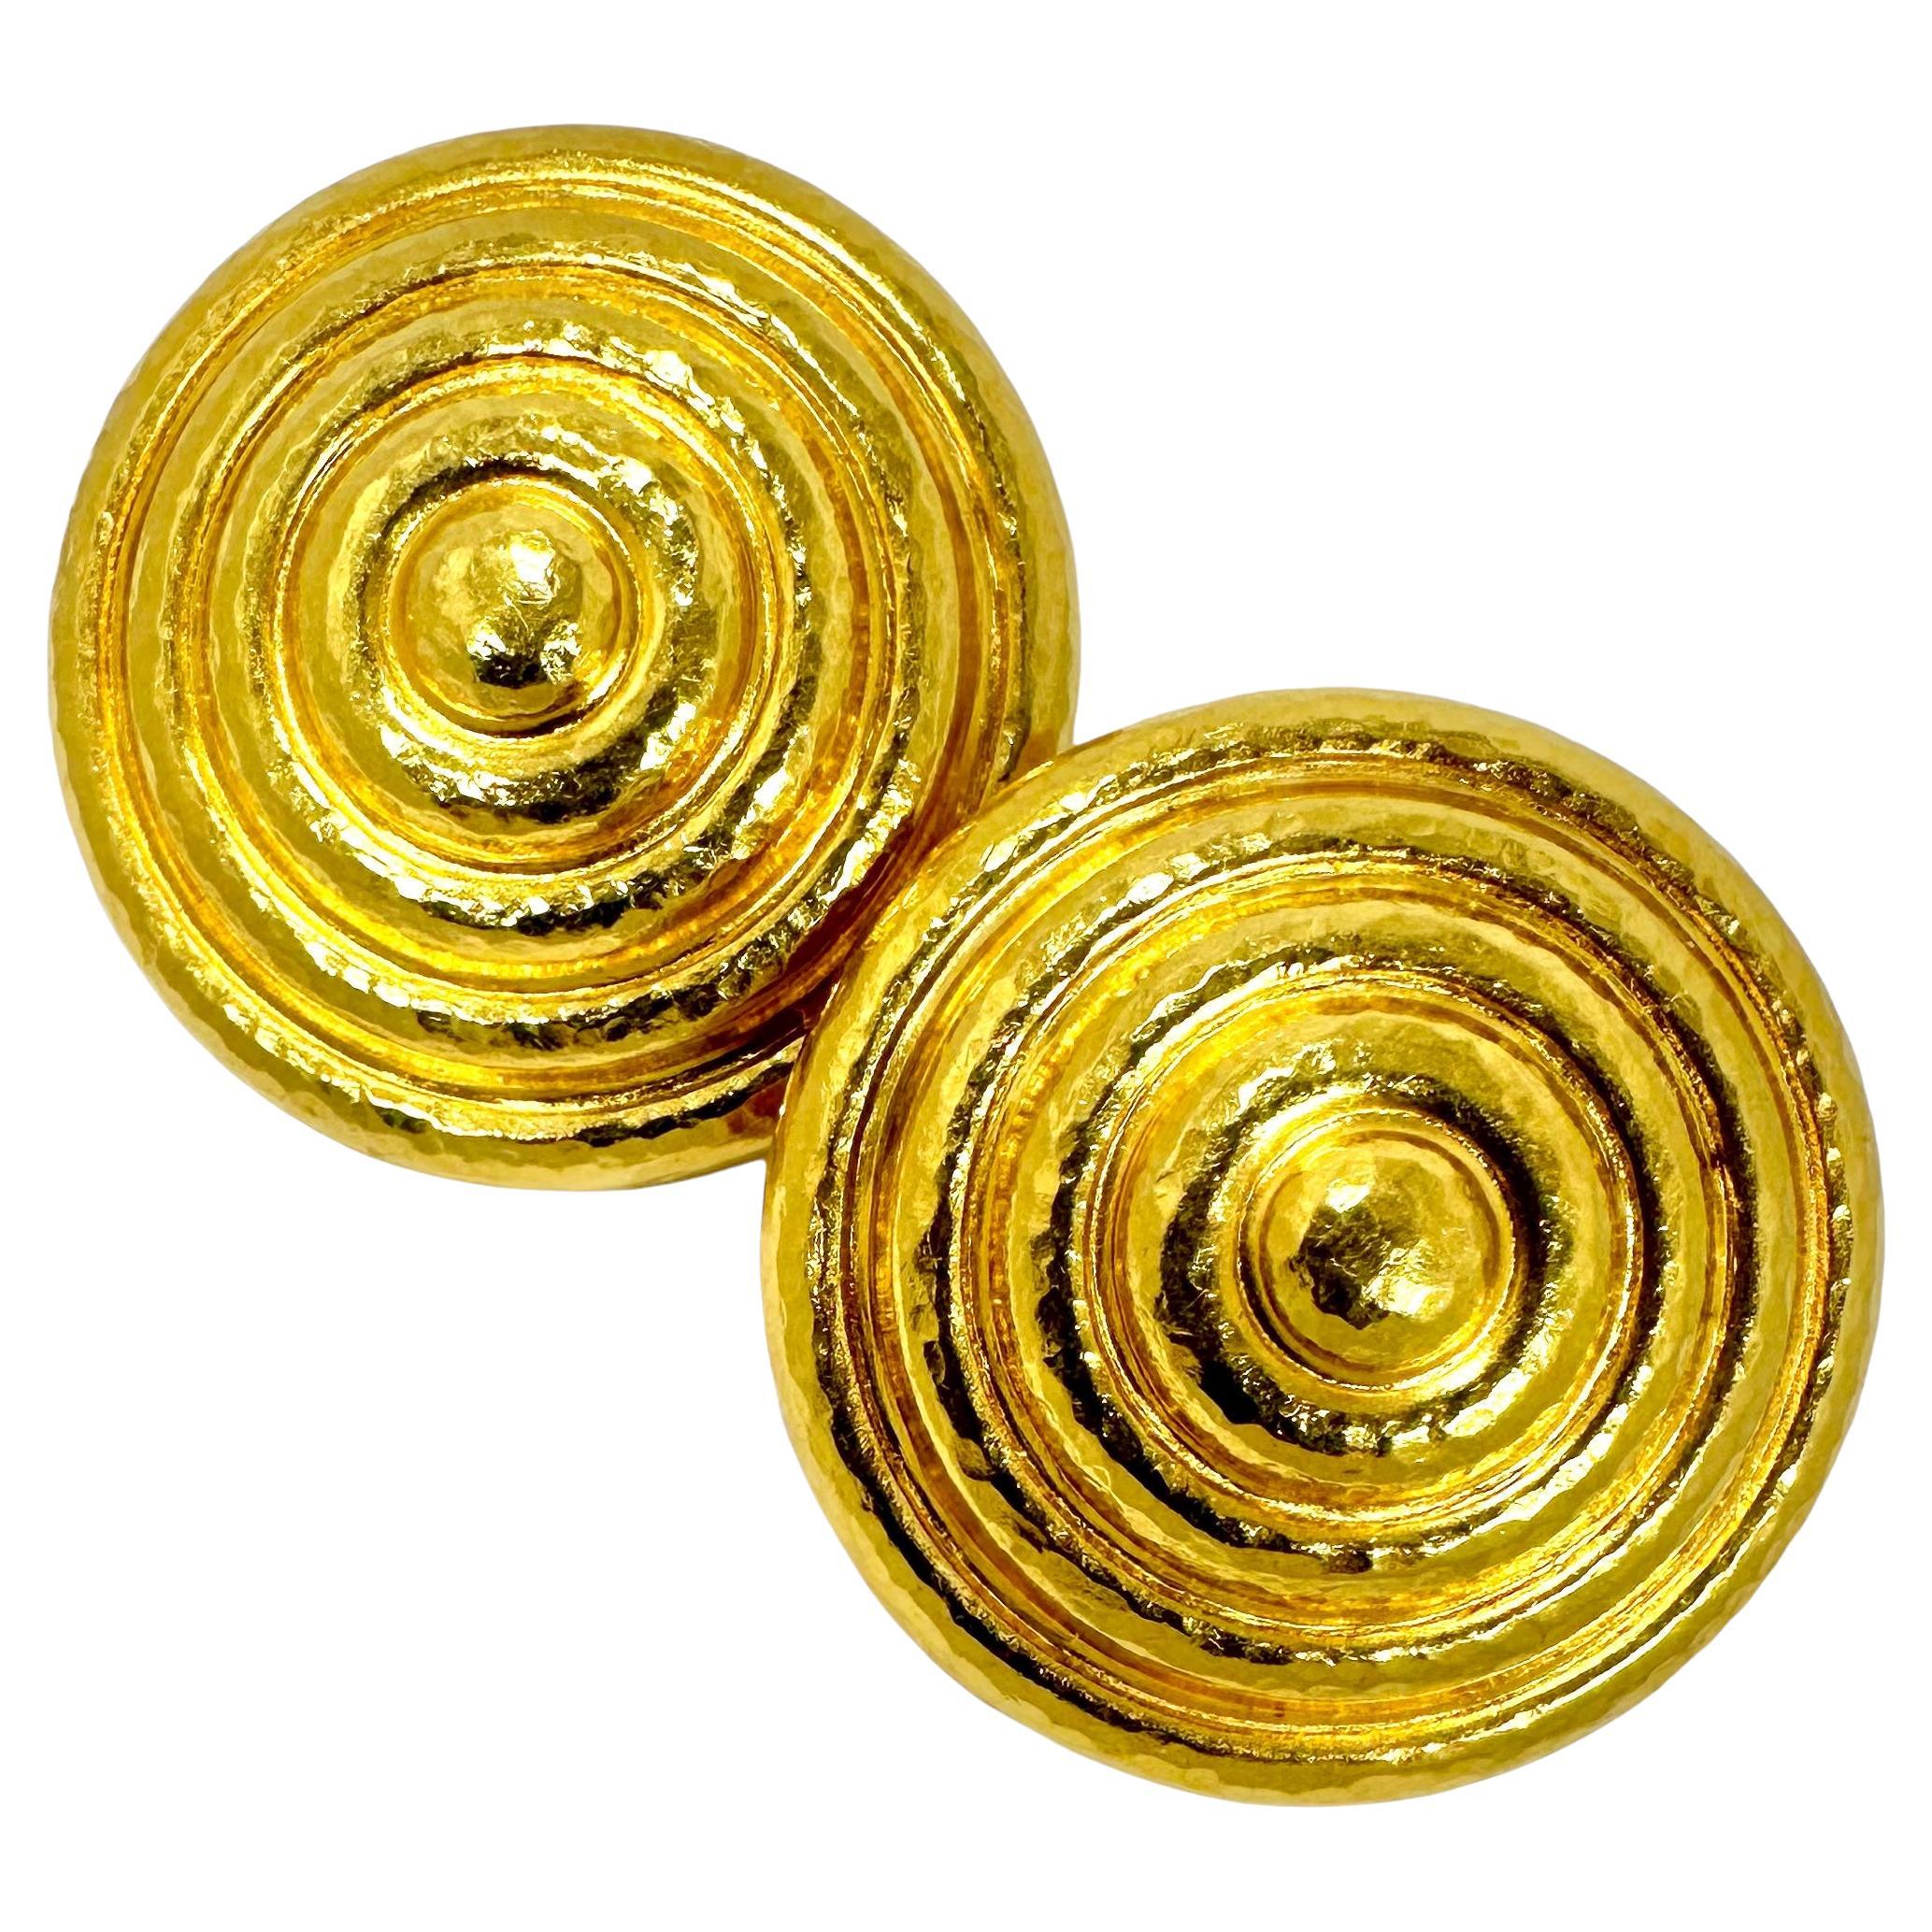 Large Lalaounis 18K Yellow Gold Concentric Circle Earrings 1.38 Inch Diameter 